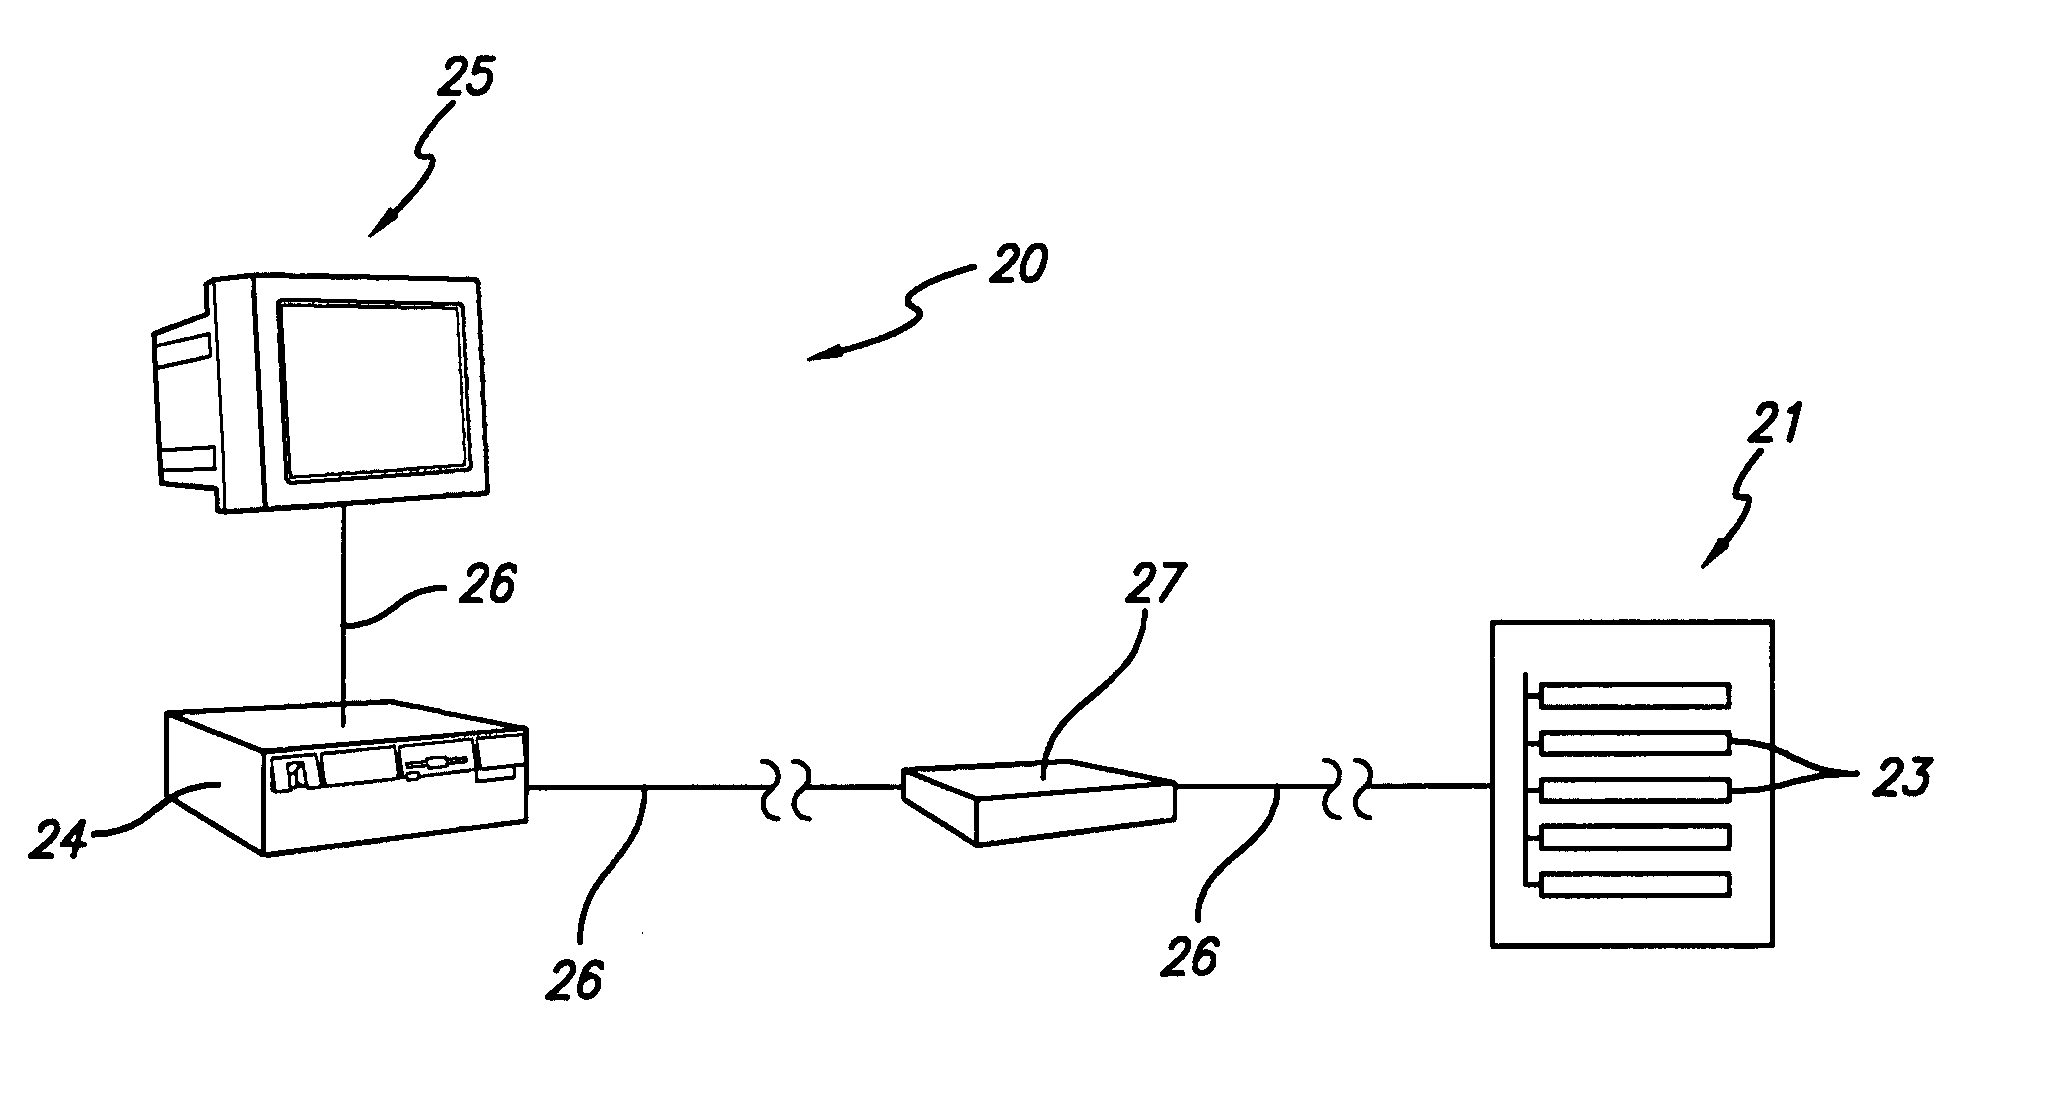 Method and system for integrating a passive sensor array with a mattress for patient monitoring